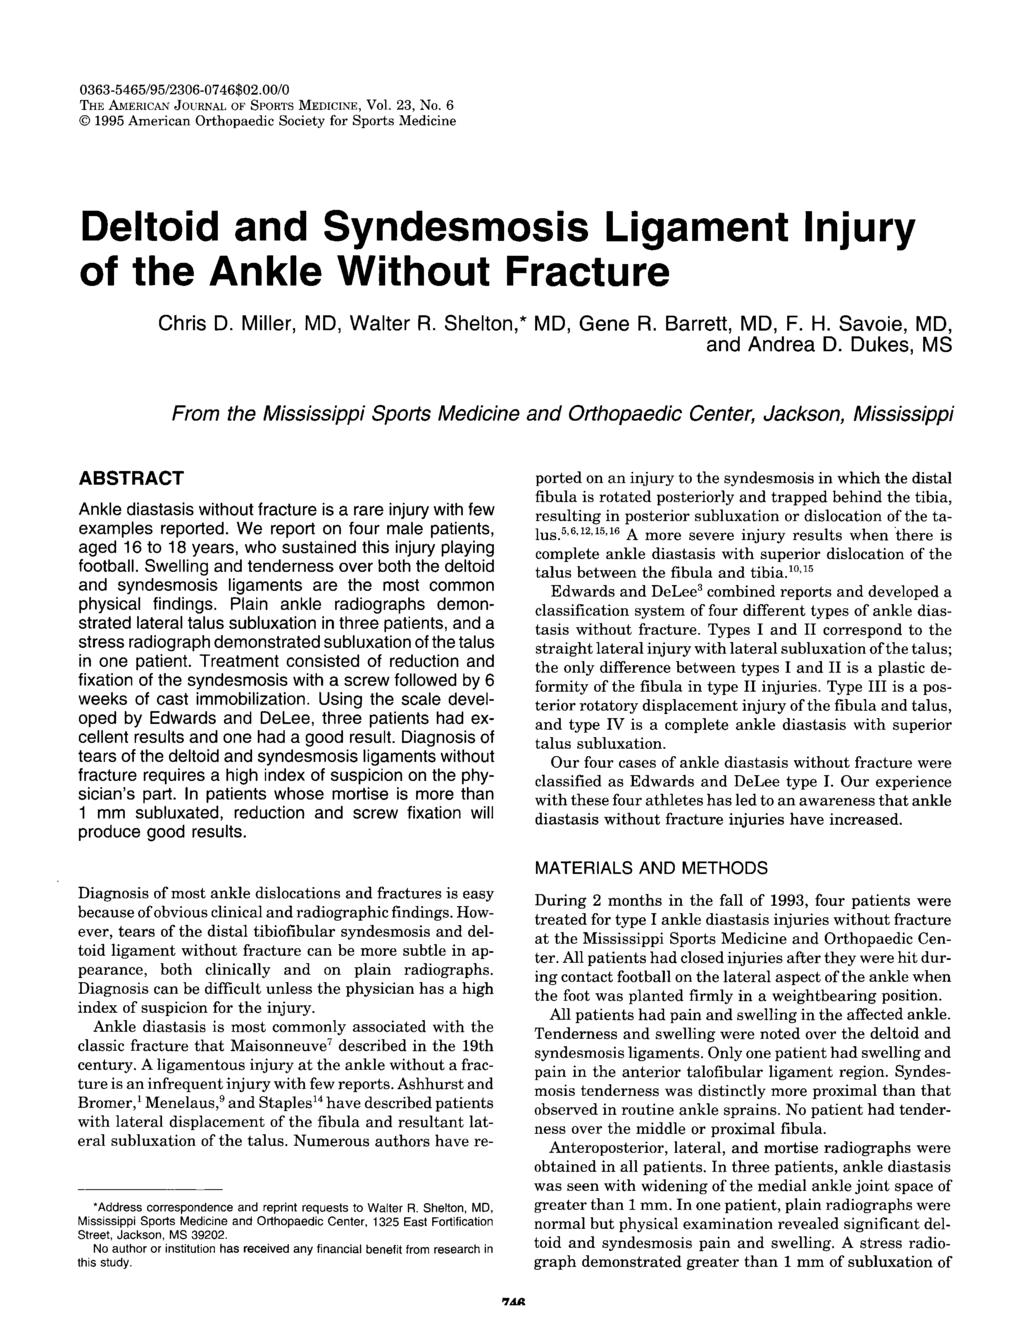 Deltoid and Syndesmosis Ligament Injury of the Ankle Without Fracture Chris D. Miller, MD, Walter R. Shelton,* MD, Gene R. Barrett, MD, F. H. Savoie, MD, and Andrea D.